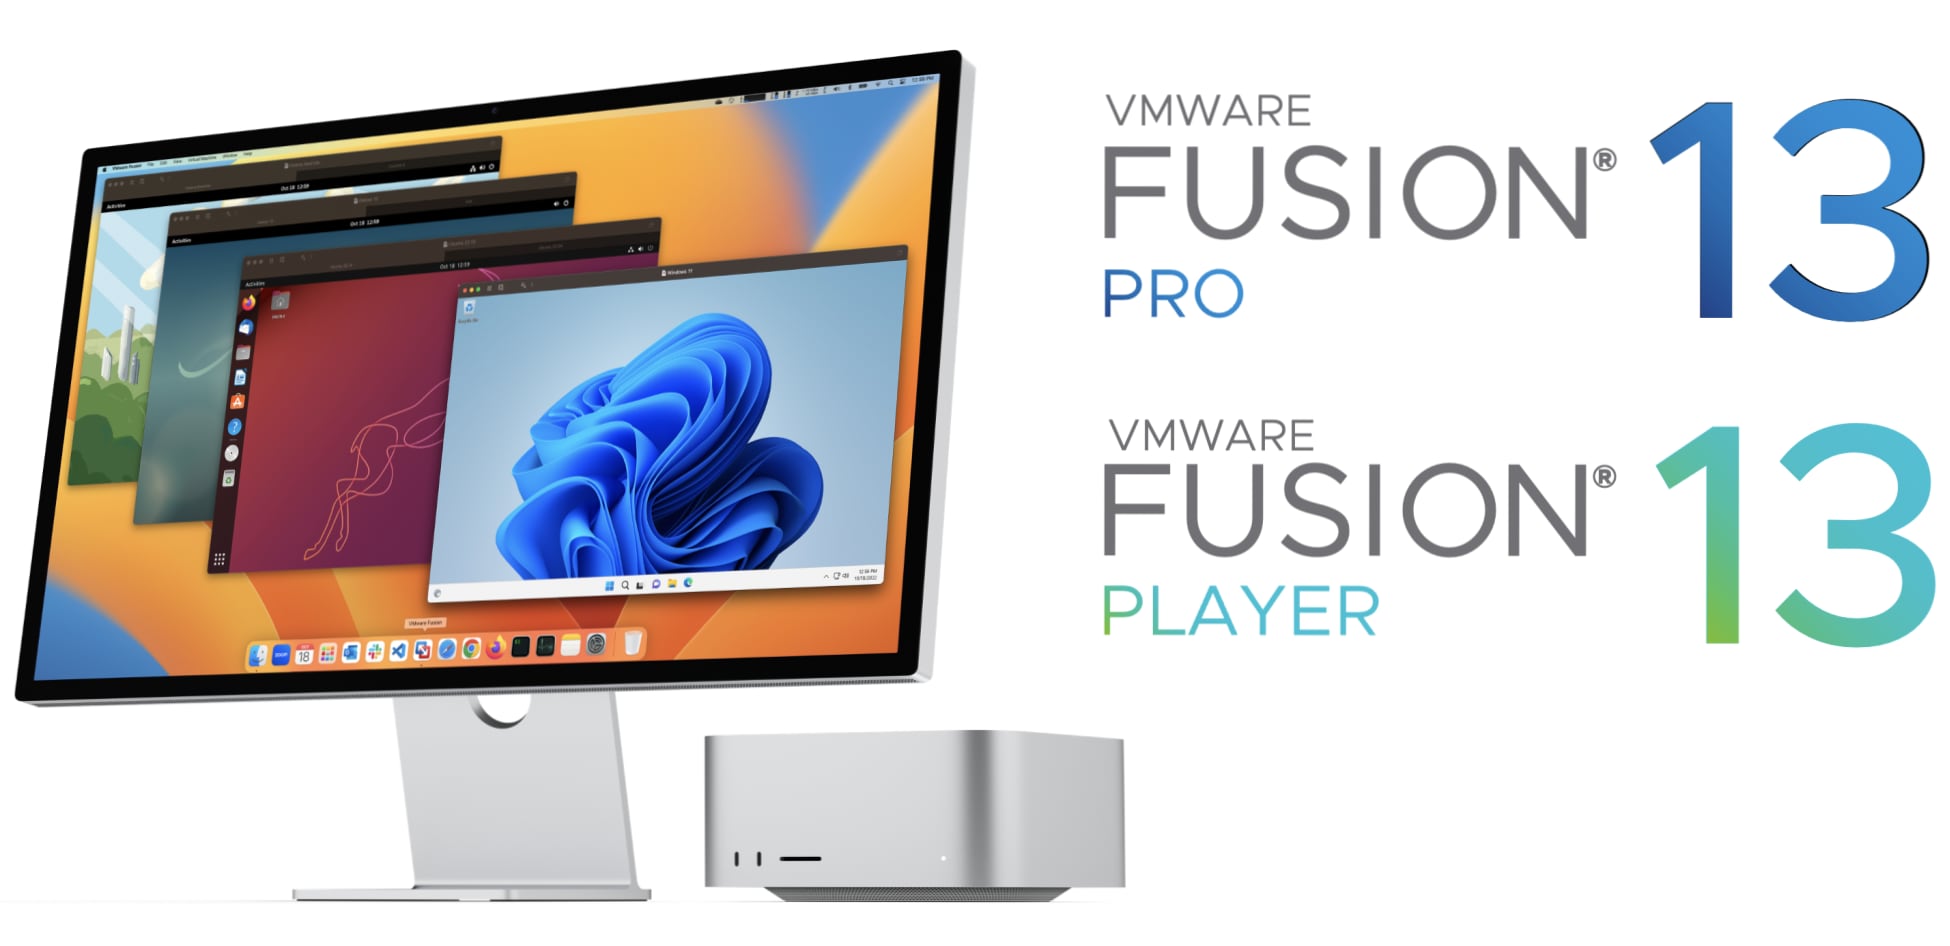 VMware Fusion 13 Now Available With Native Support for Apple Silicon Macs